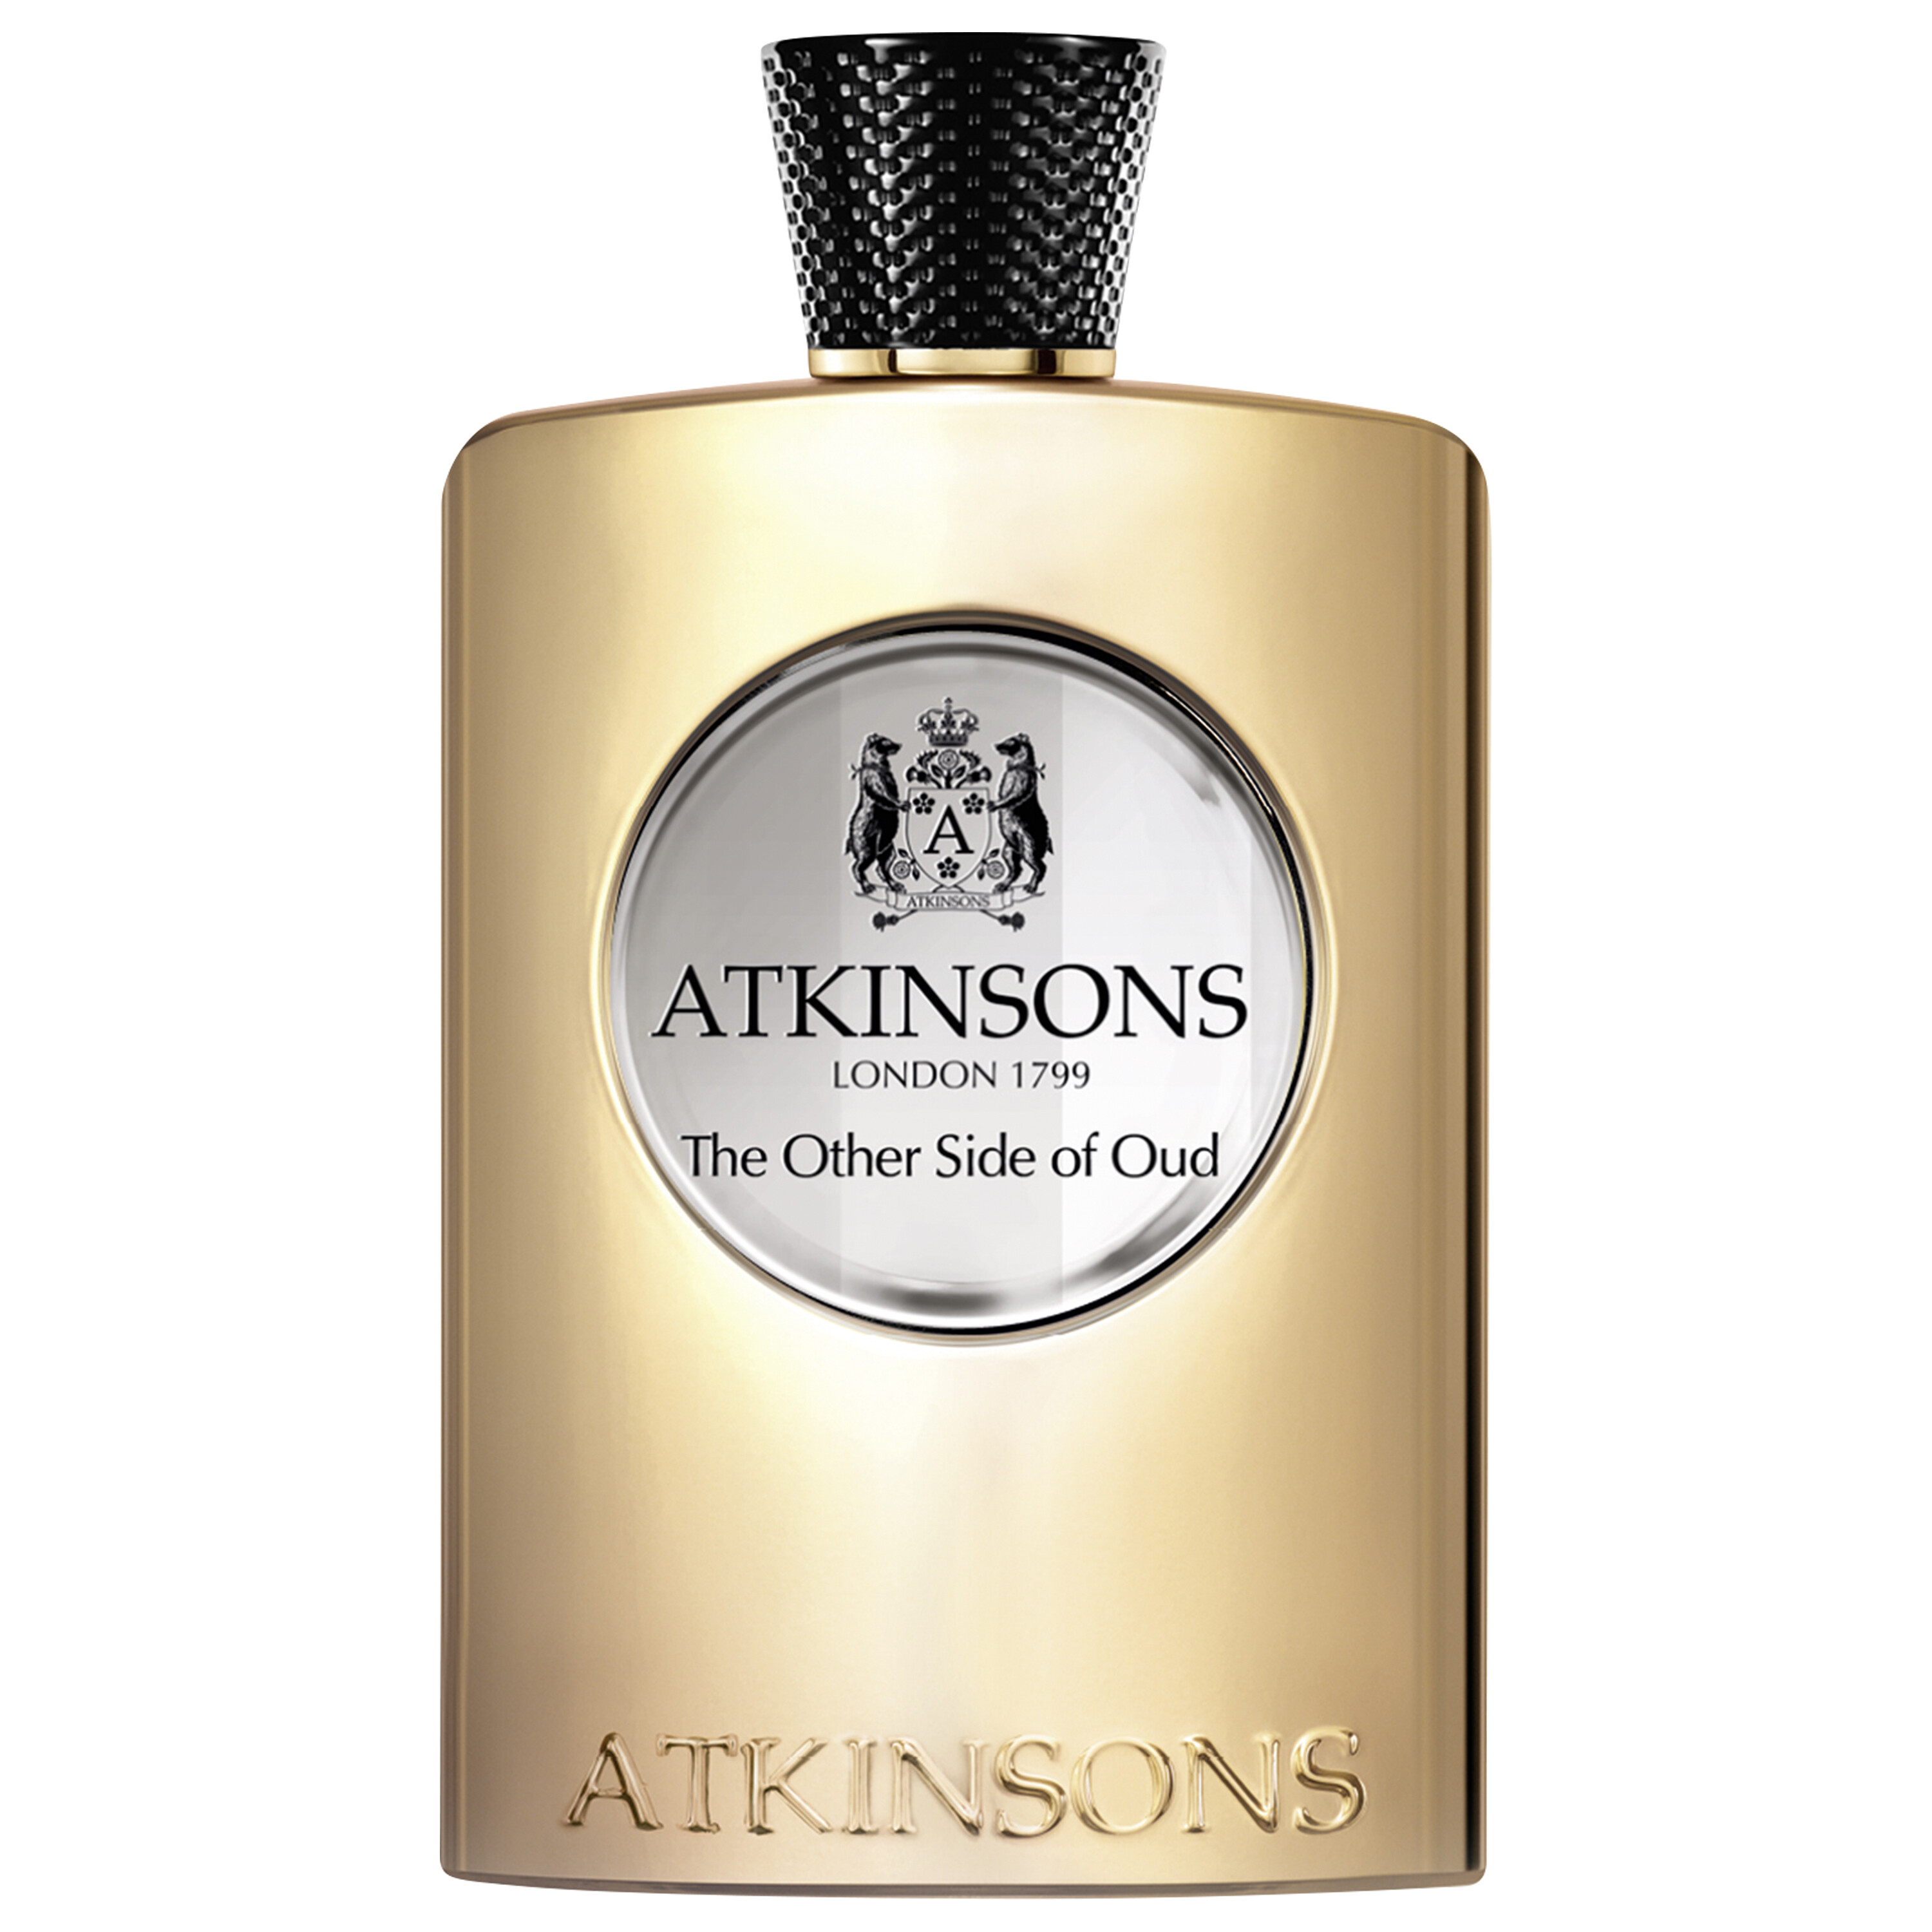 Atkinsons The Other Side of Oud EDP